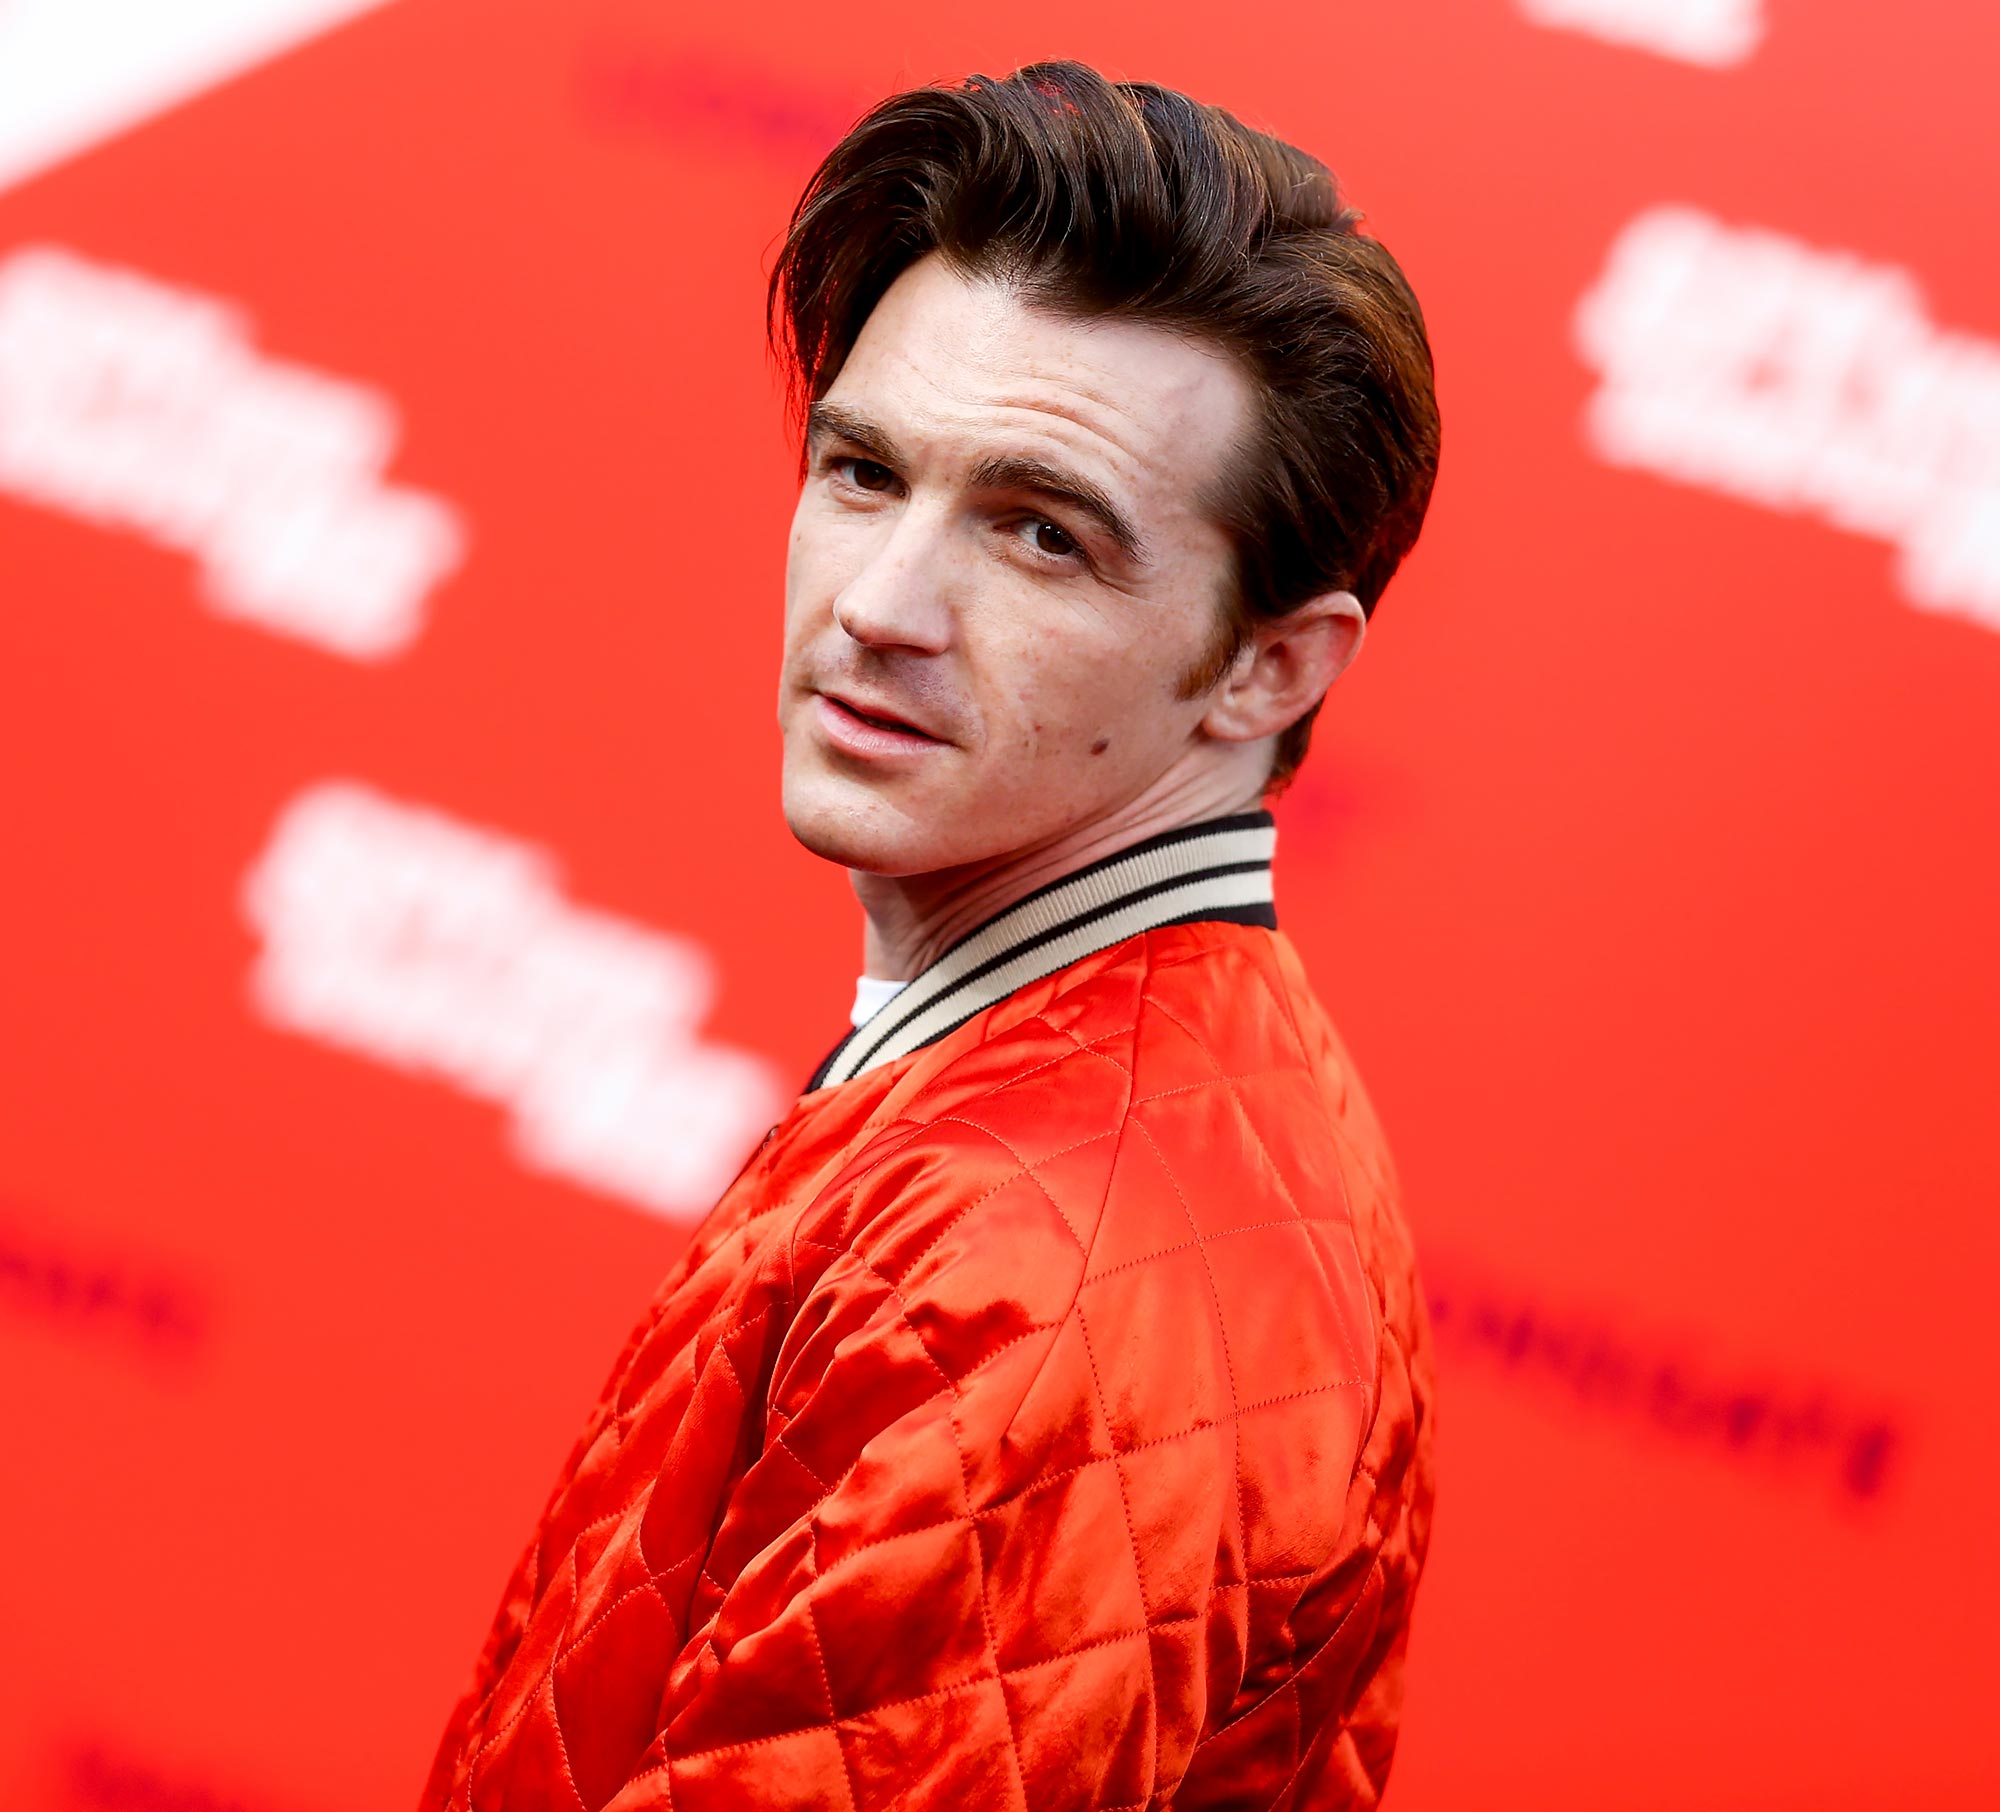 Drake Bell Reveals He Wrote ‘In the End’ at Age 15 About Sexual Abuse ‘Before I Said Anything’